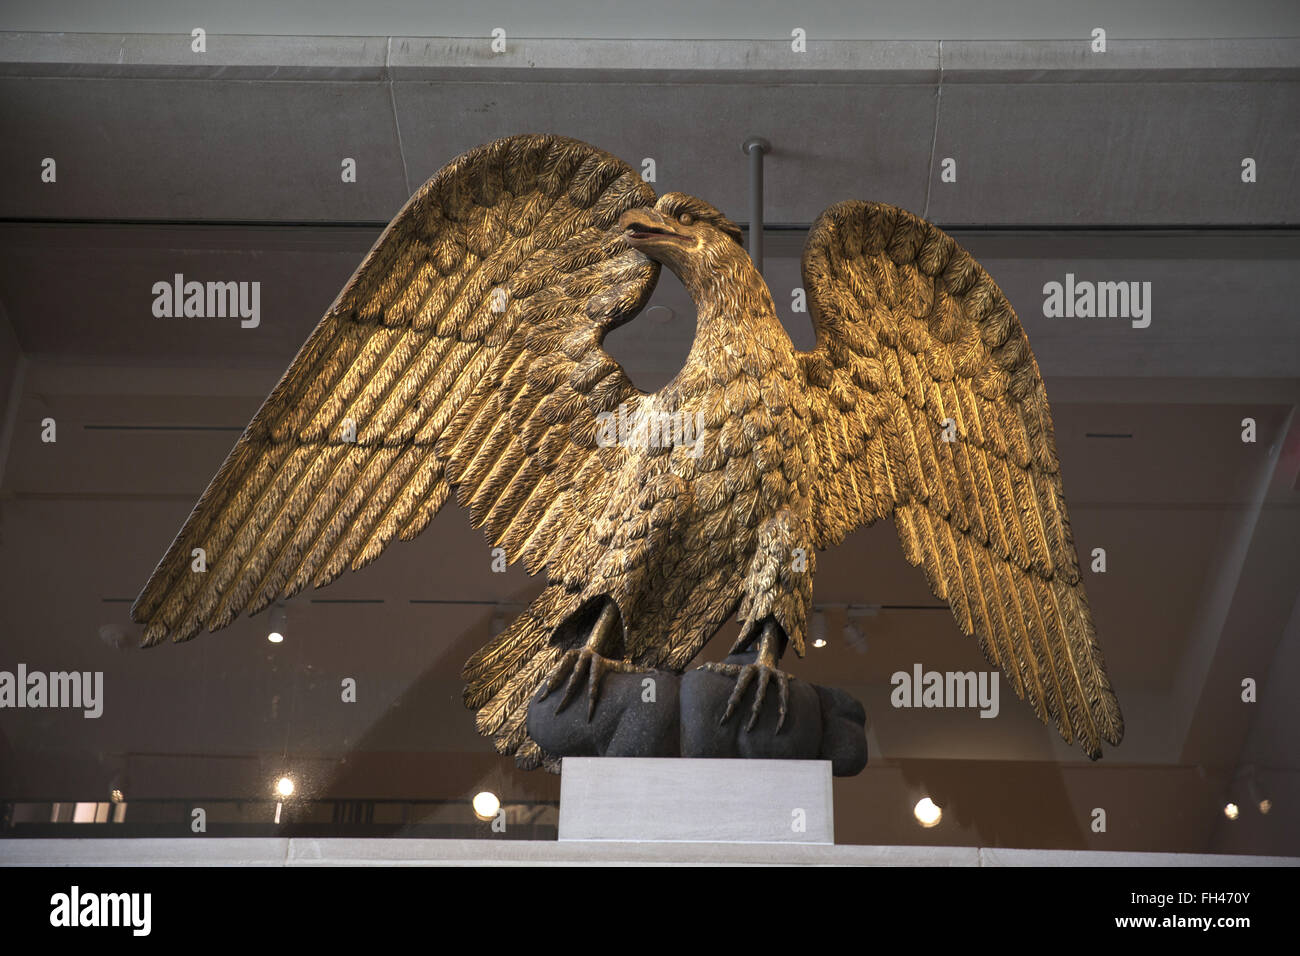 American Bald Eagle from the early 1800's at the Metropolitan Museum of Art in New York City. (Carved of wood and gilded) The American bald eagle was adopted by the United States Congress for the national seal in 1782. Stock Photo